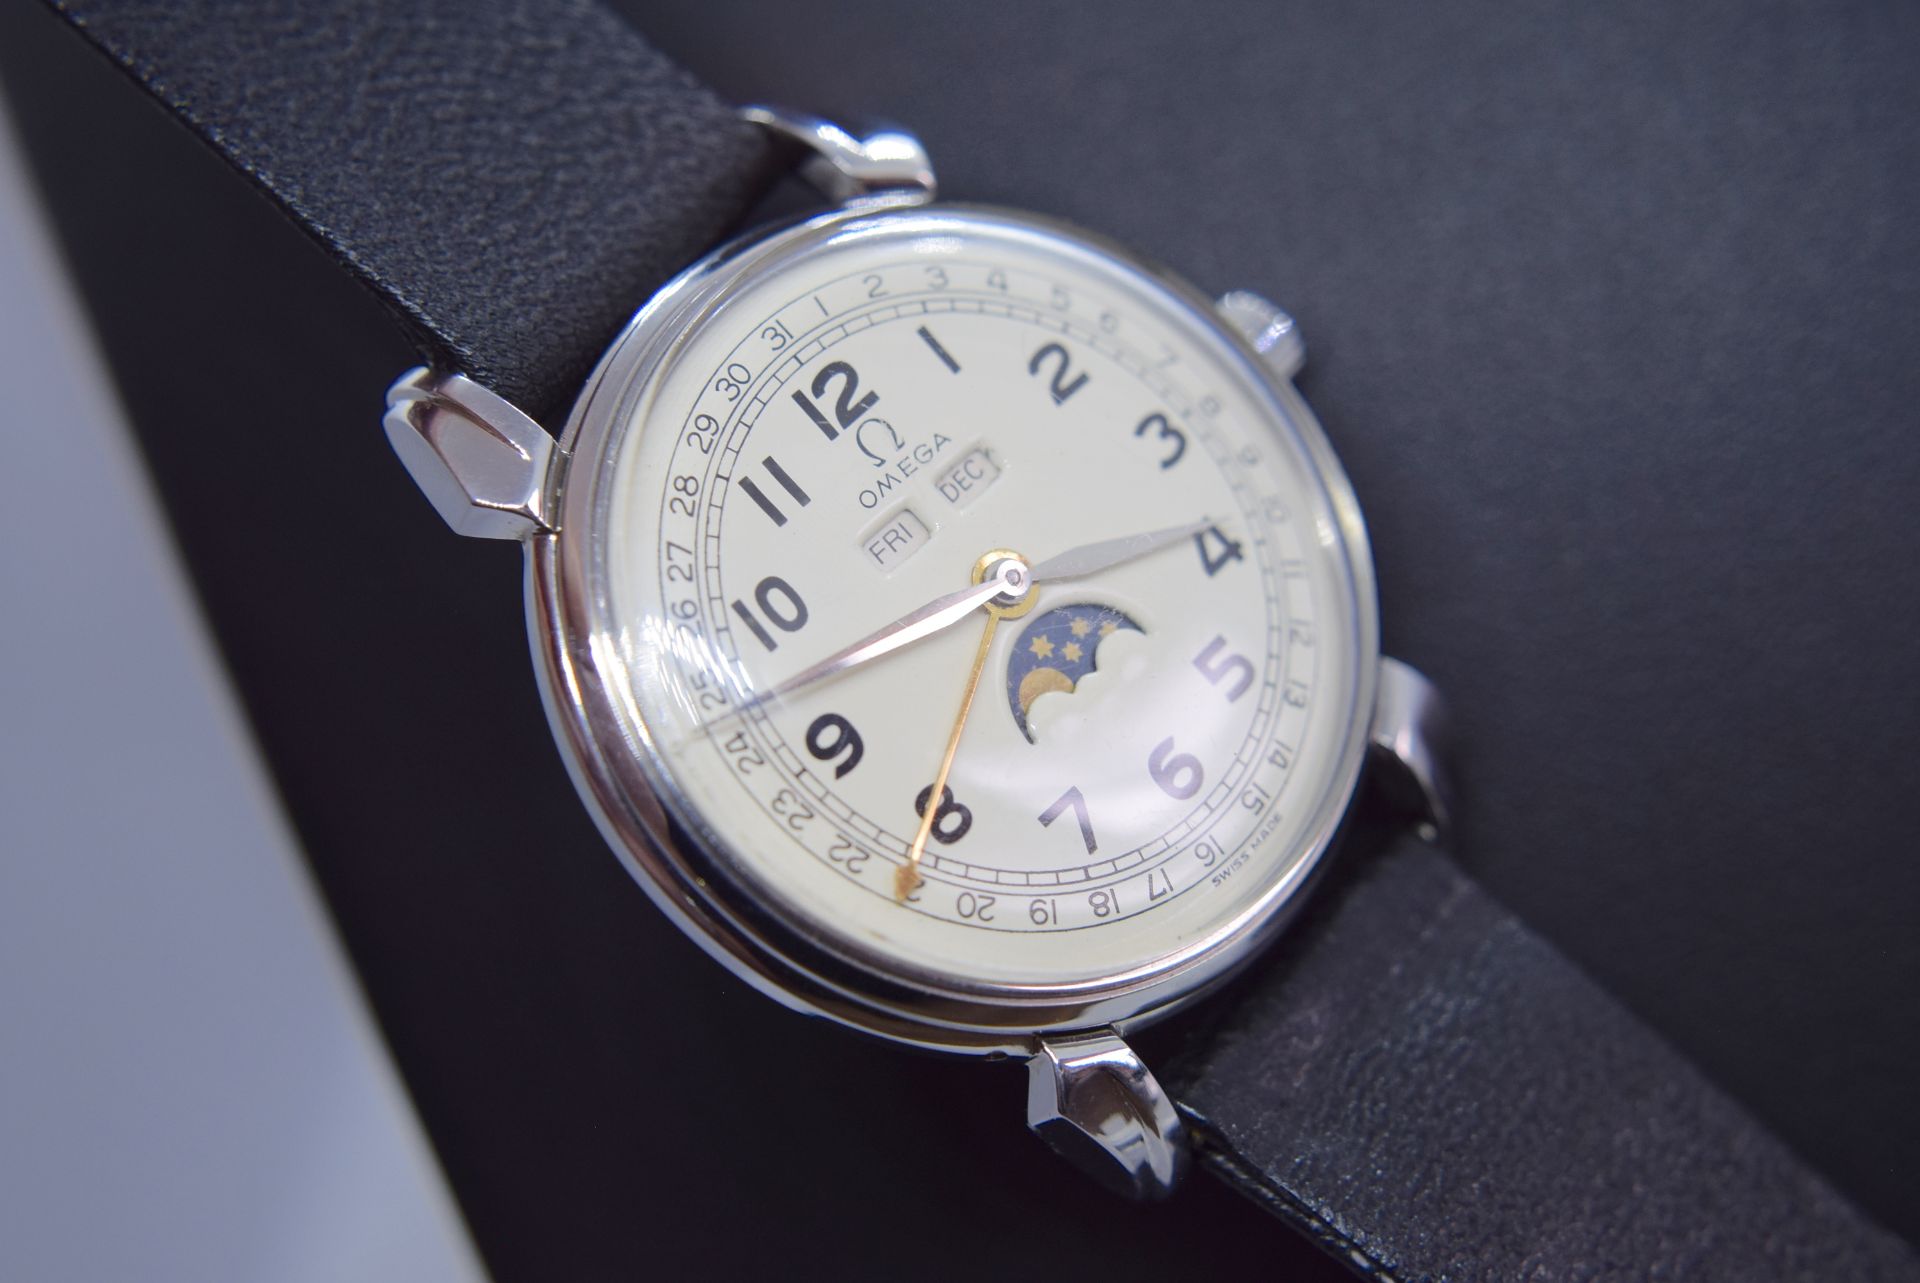 OMEGA MANUAL WIND MOONPHASE WATCH - HALLMARKED OMEGA WATCH CO. / 623846 - MOVEMENT 715 / 37045922 - Image 3 of 9